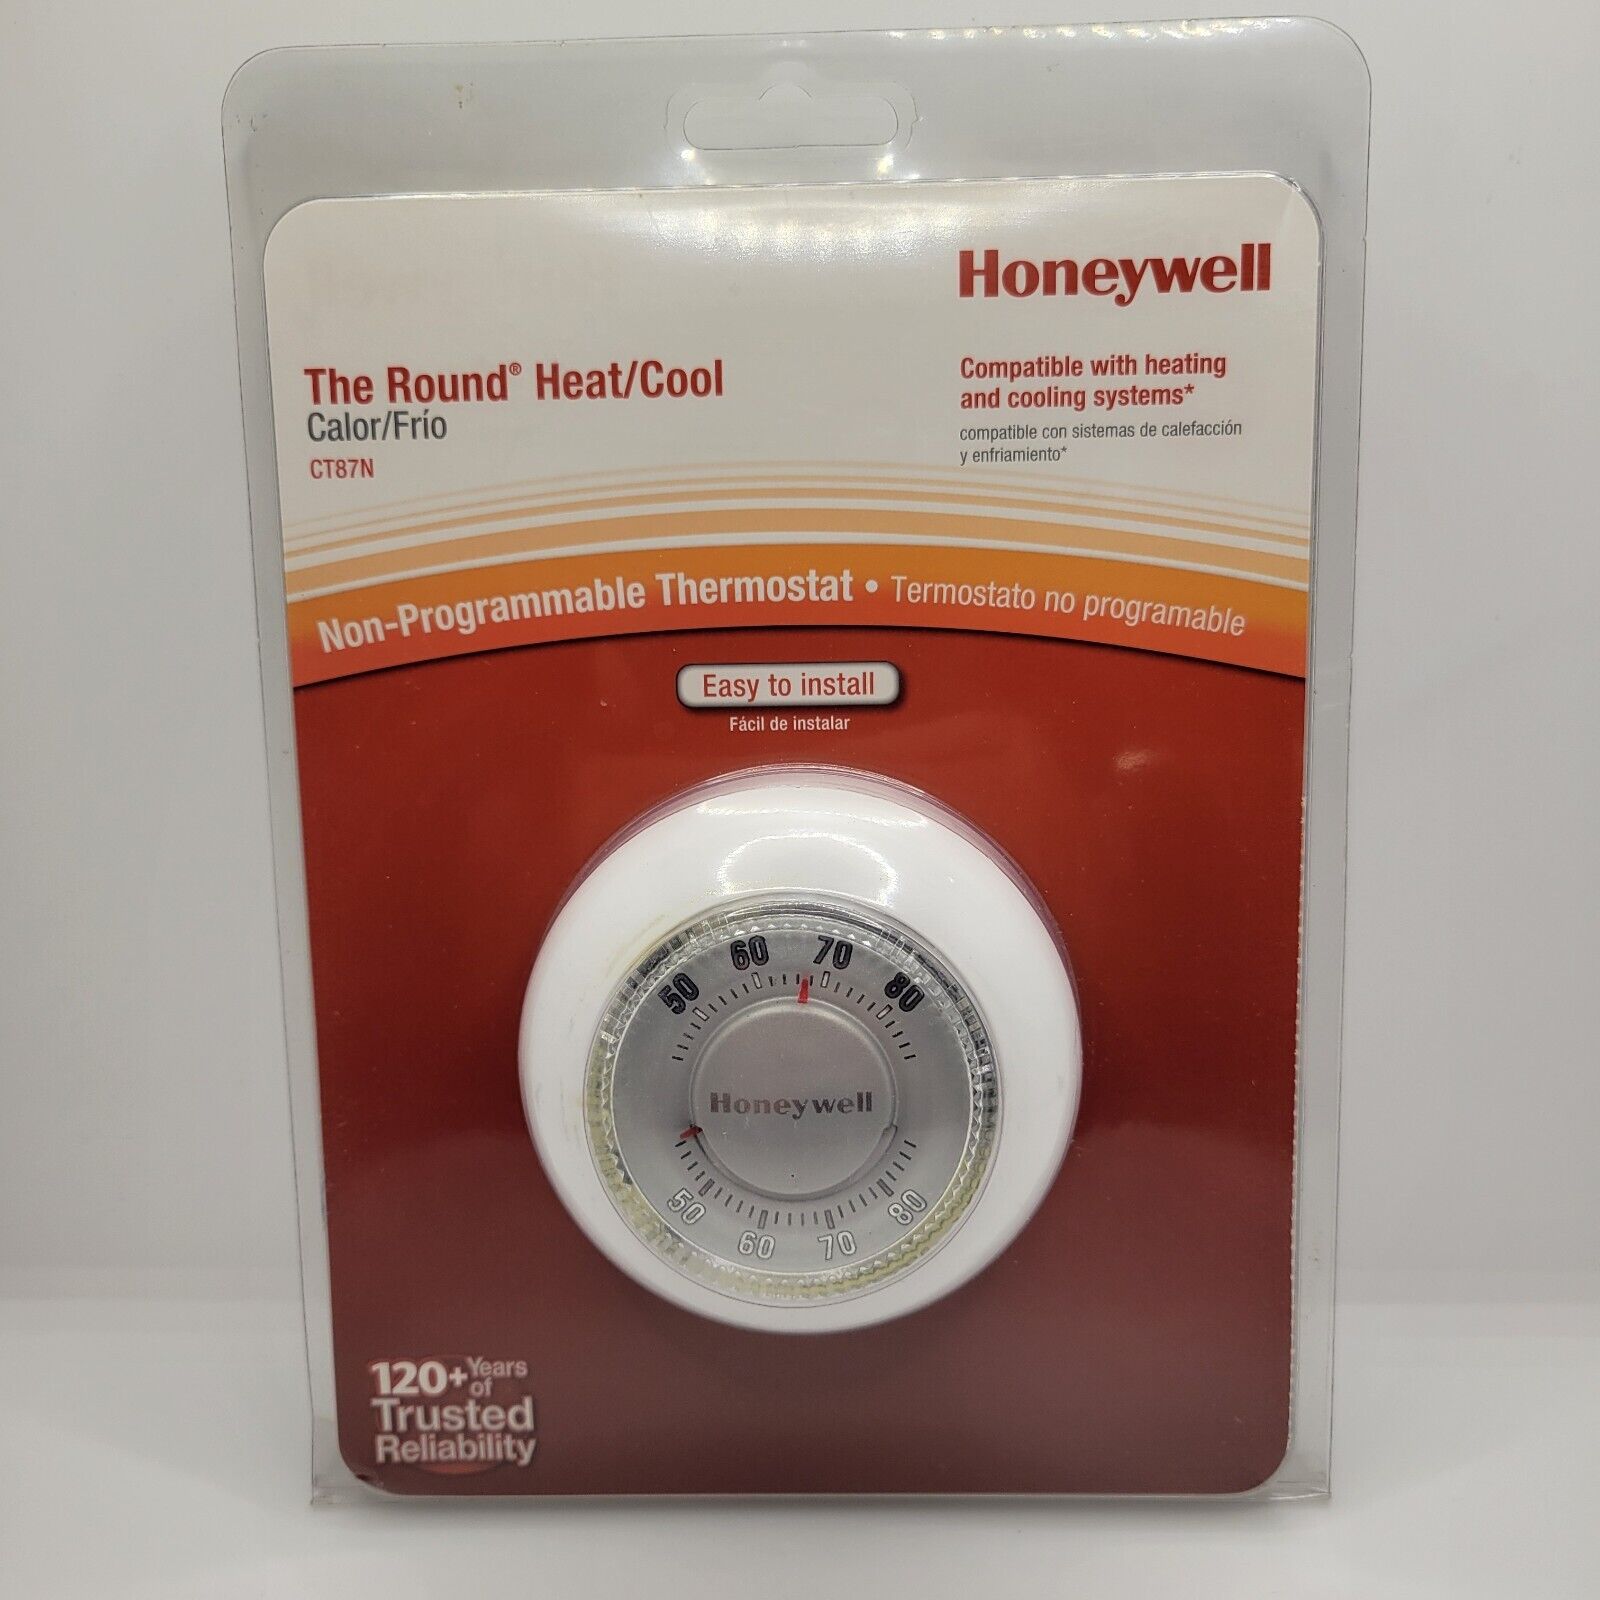 Honeywell Home CT87N Round Non-Programmable Thermostat Easy To Install Heat/Cool